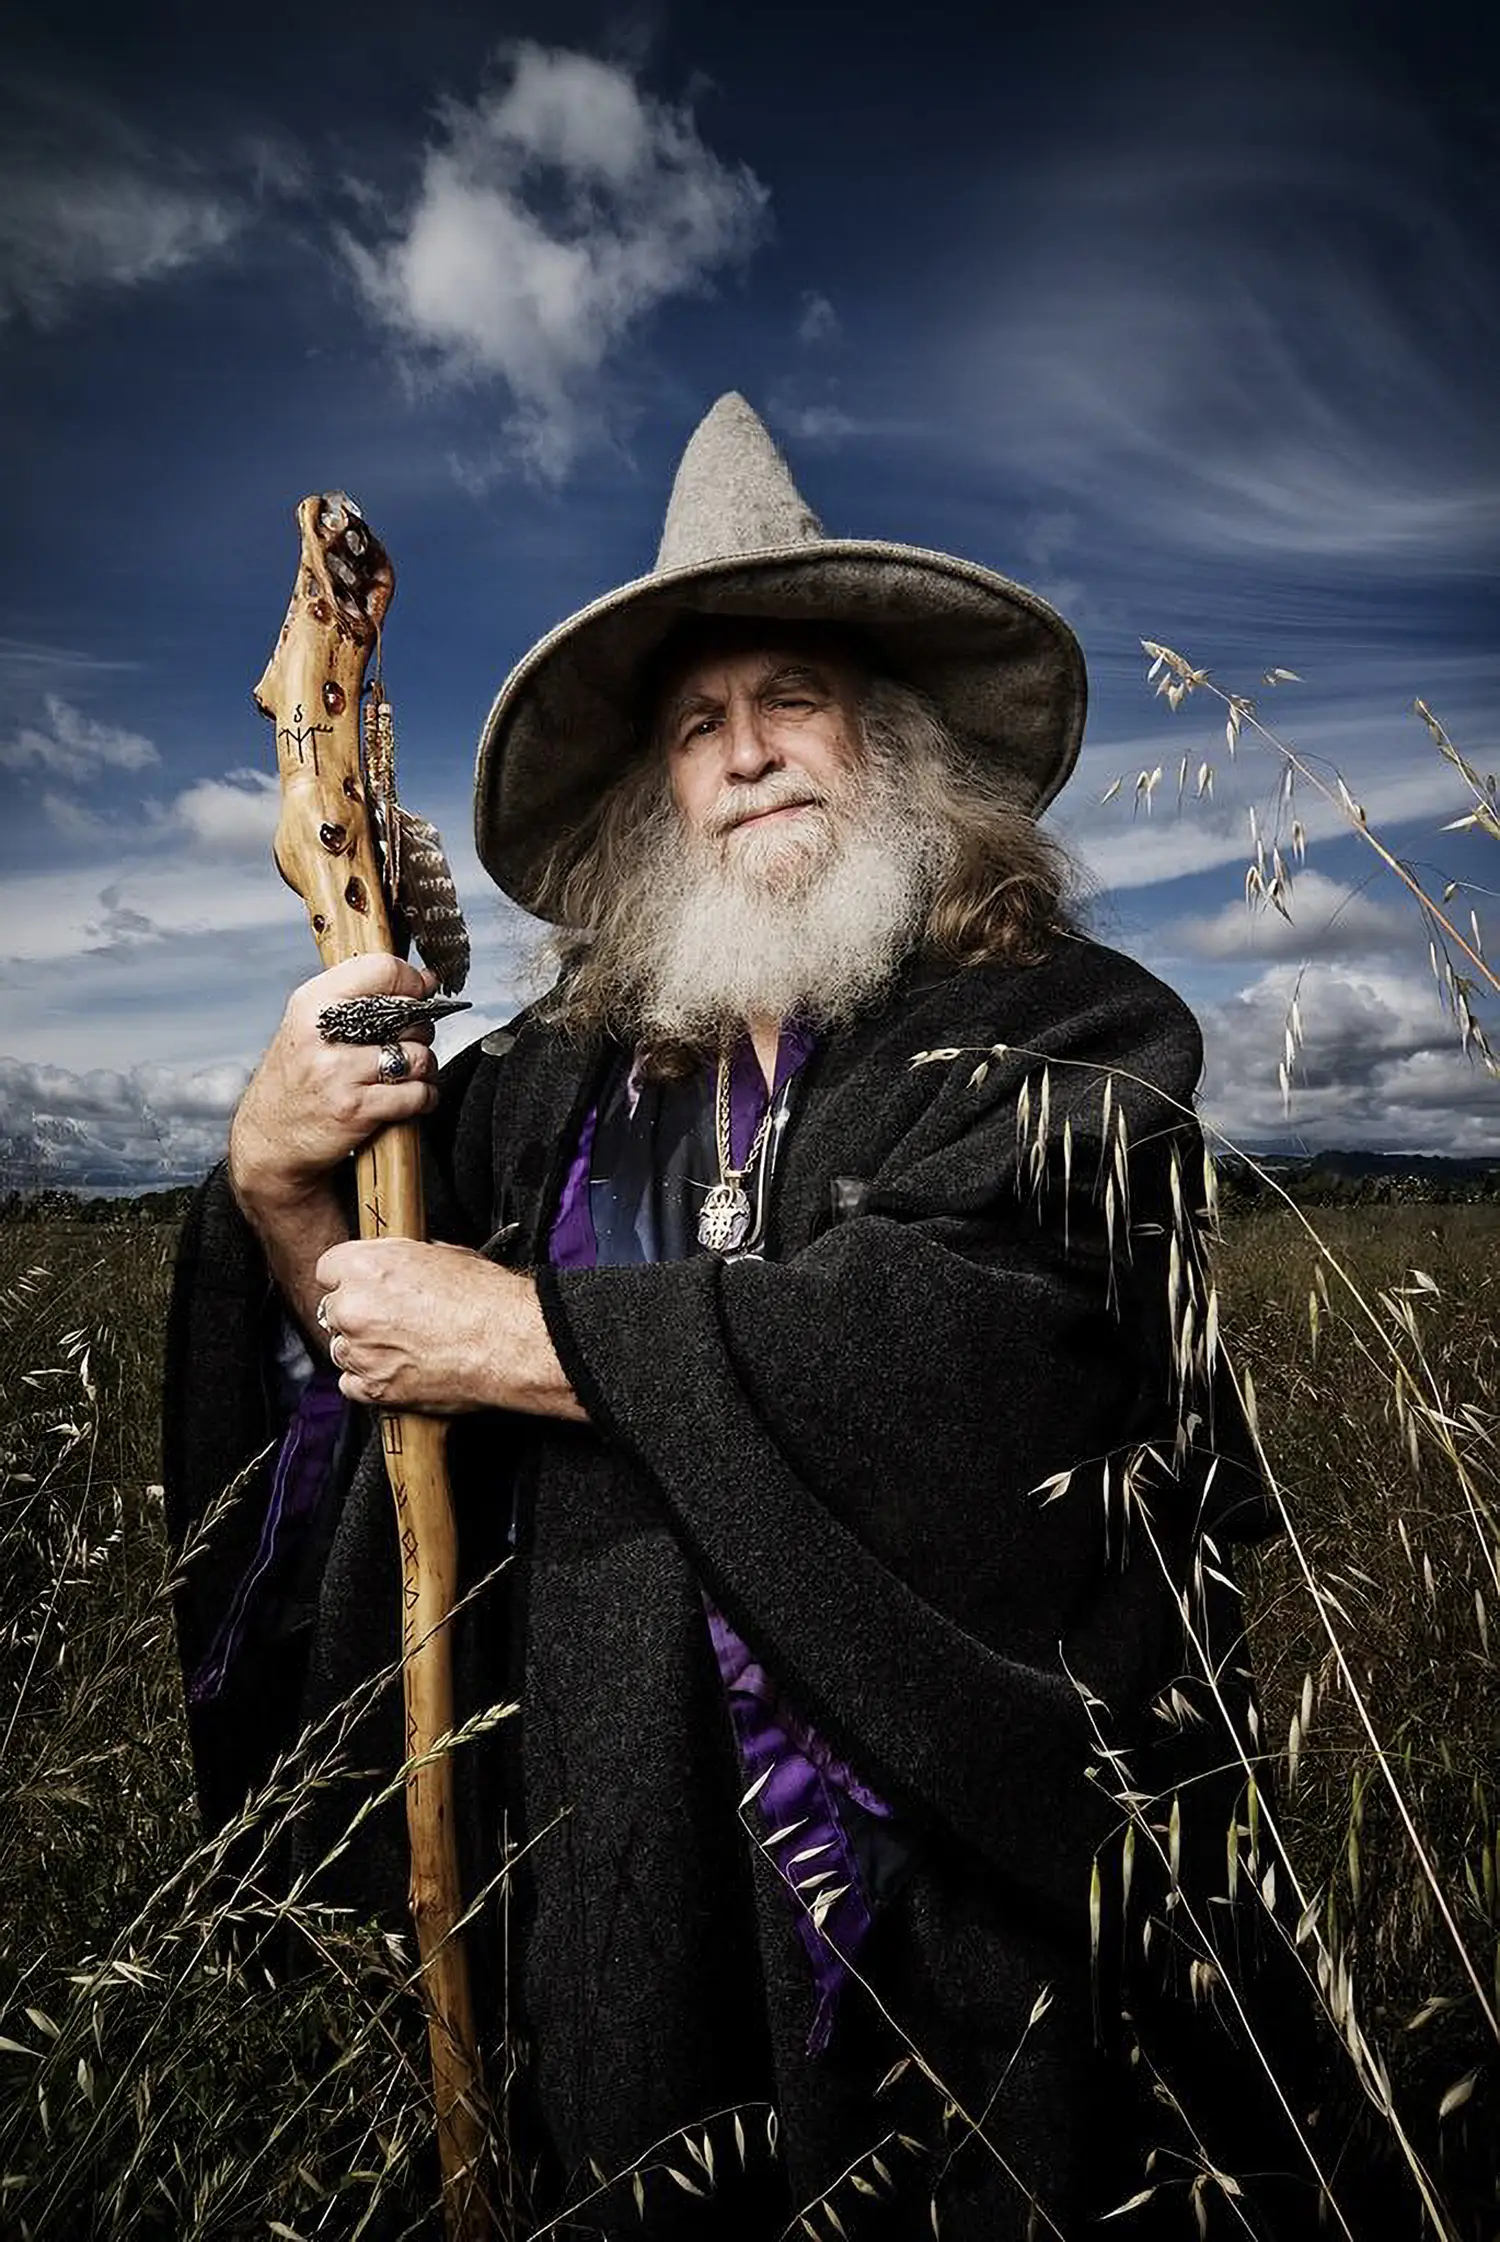 Portrait of Oberon Zell. He has flowing white hair, standing majestically in a field, holding a carved wooden staff. Dressed in a black cloak and wide-brimmed hat, his attire is accented with deep purple fabric and adorned with various trinkets and symbols.